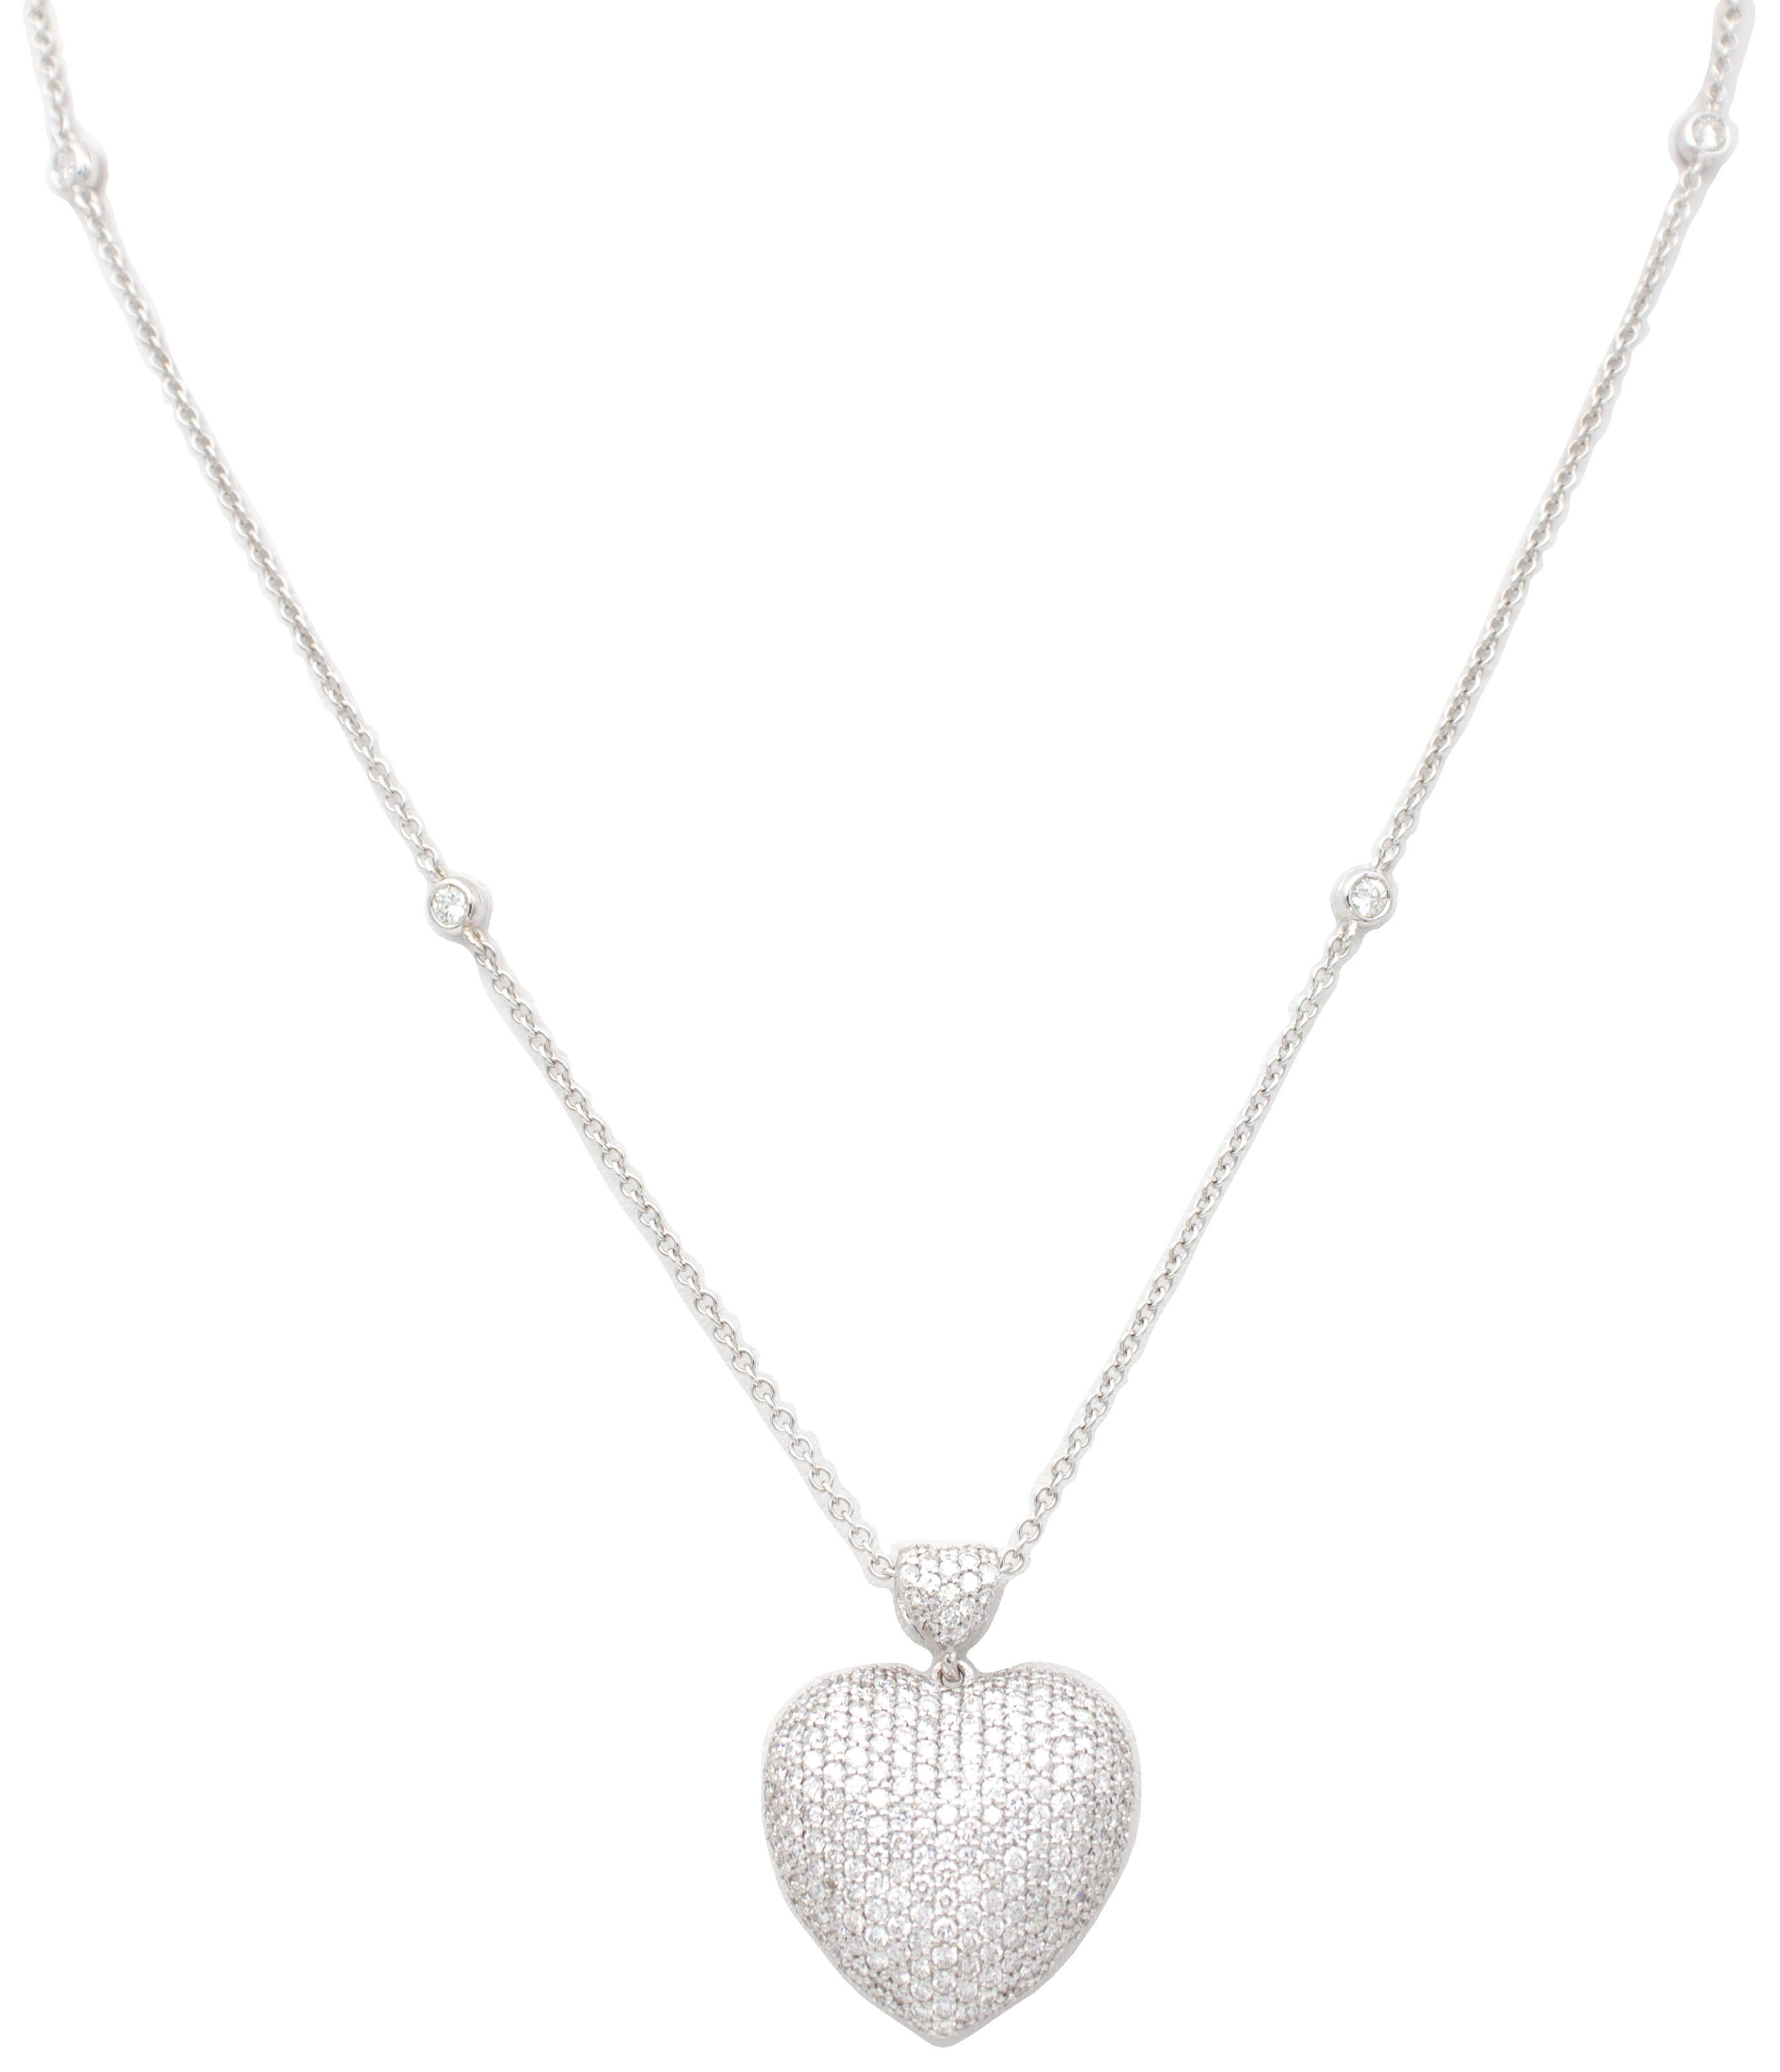 SHIPPING POLICY:
No additional costs will be added to this order.
Shipping costs will be totally covered by the seller (customs duties included).

Elegant and refine pendant necklace realized in 18 kt white gold, composed of white gold chain studded